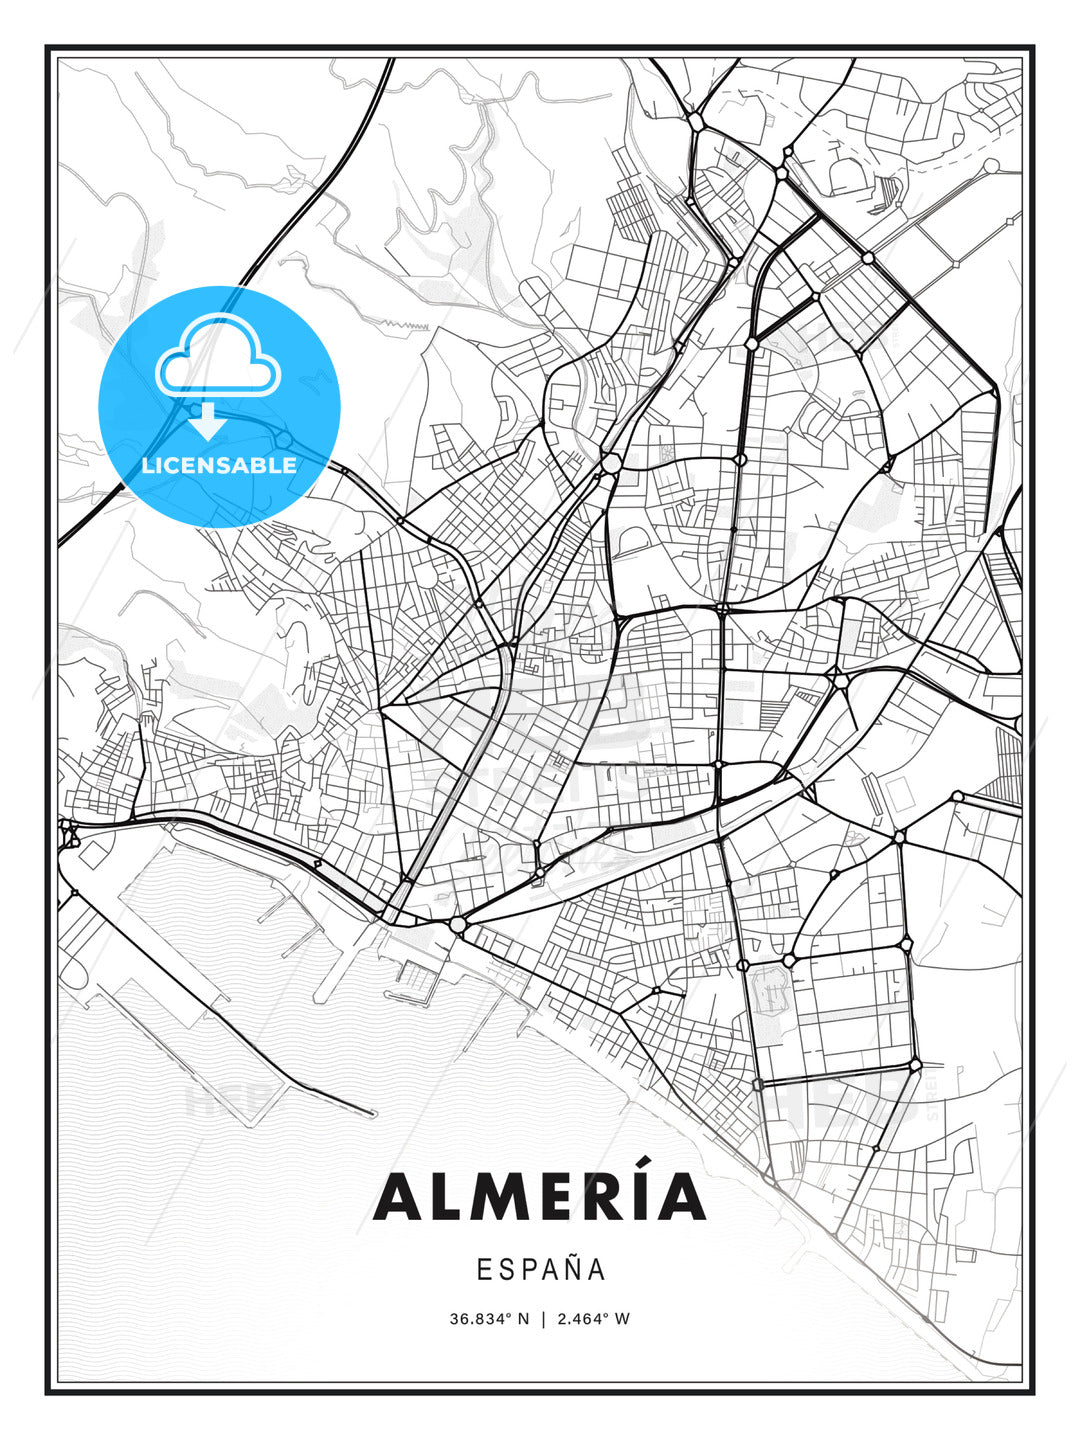 Almería, Spain, Modern Print Template in Various Formats - HEBSTREITS Sketches